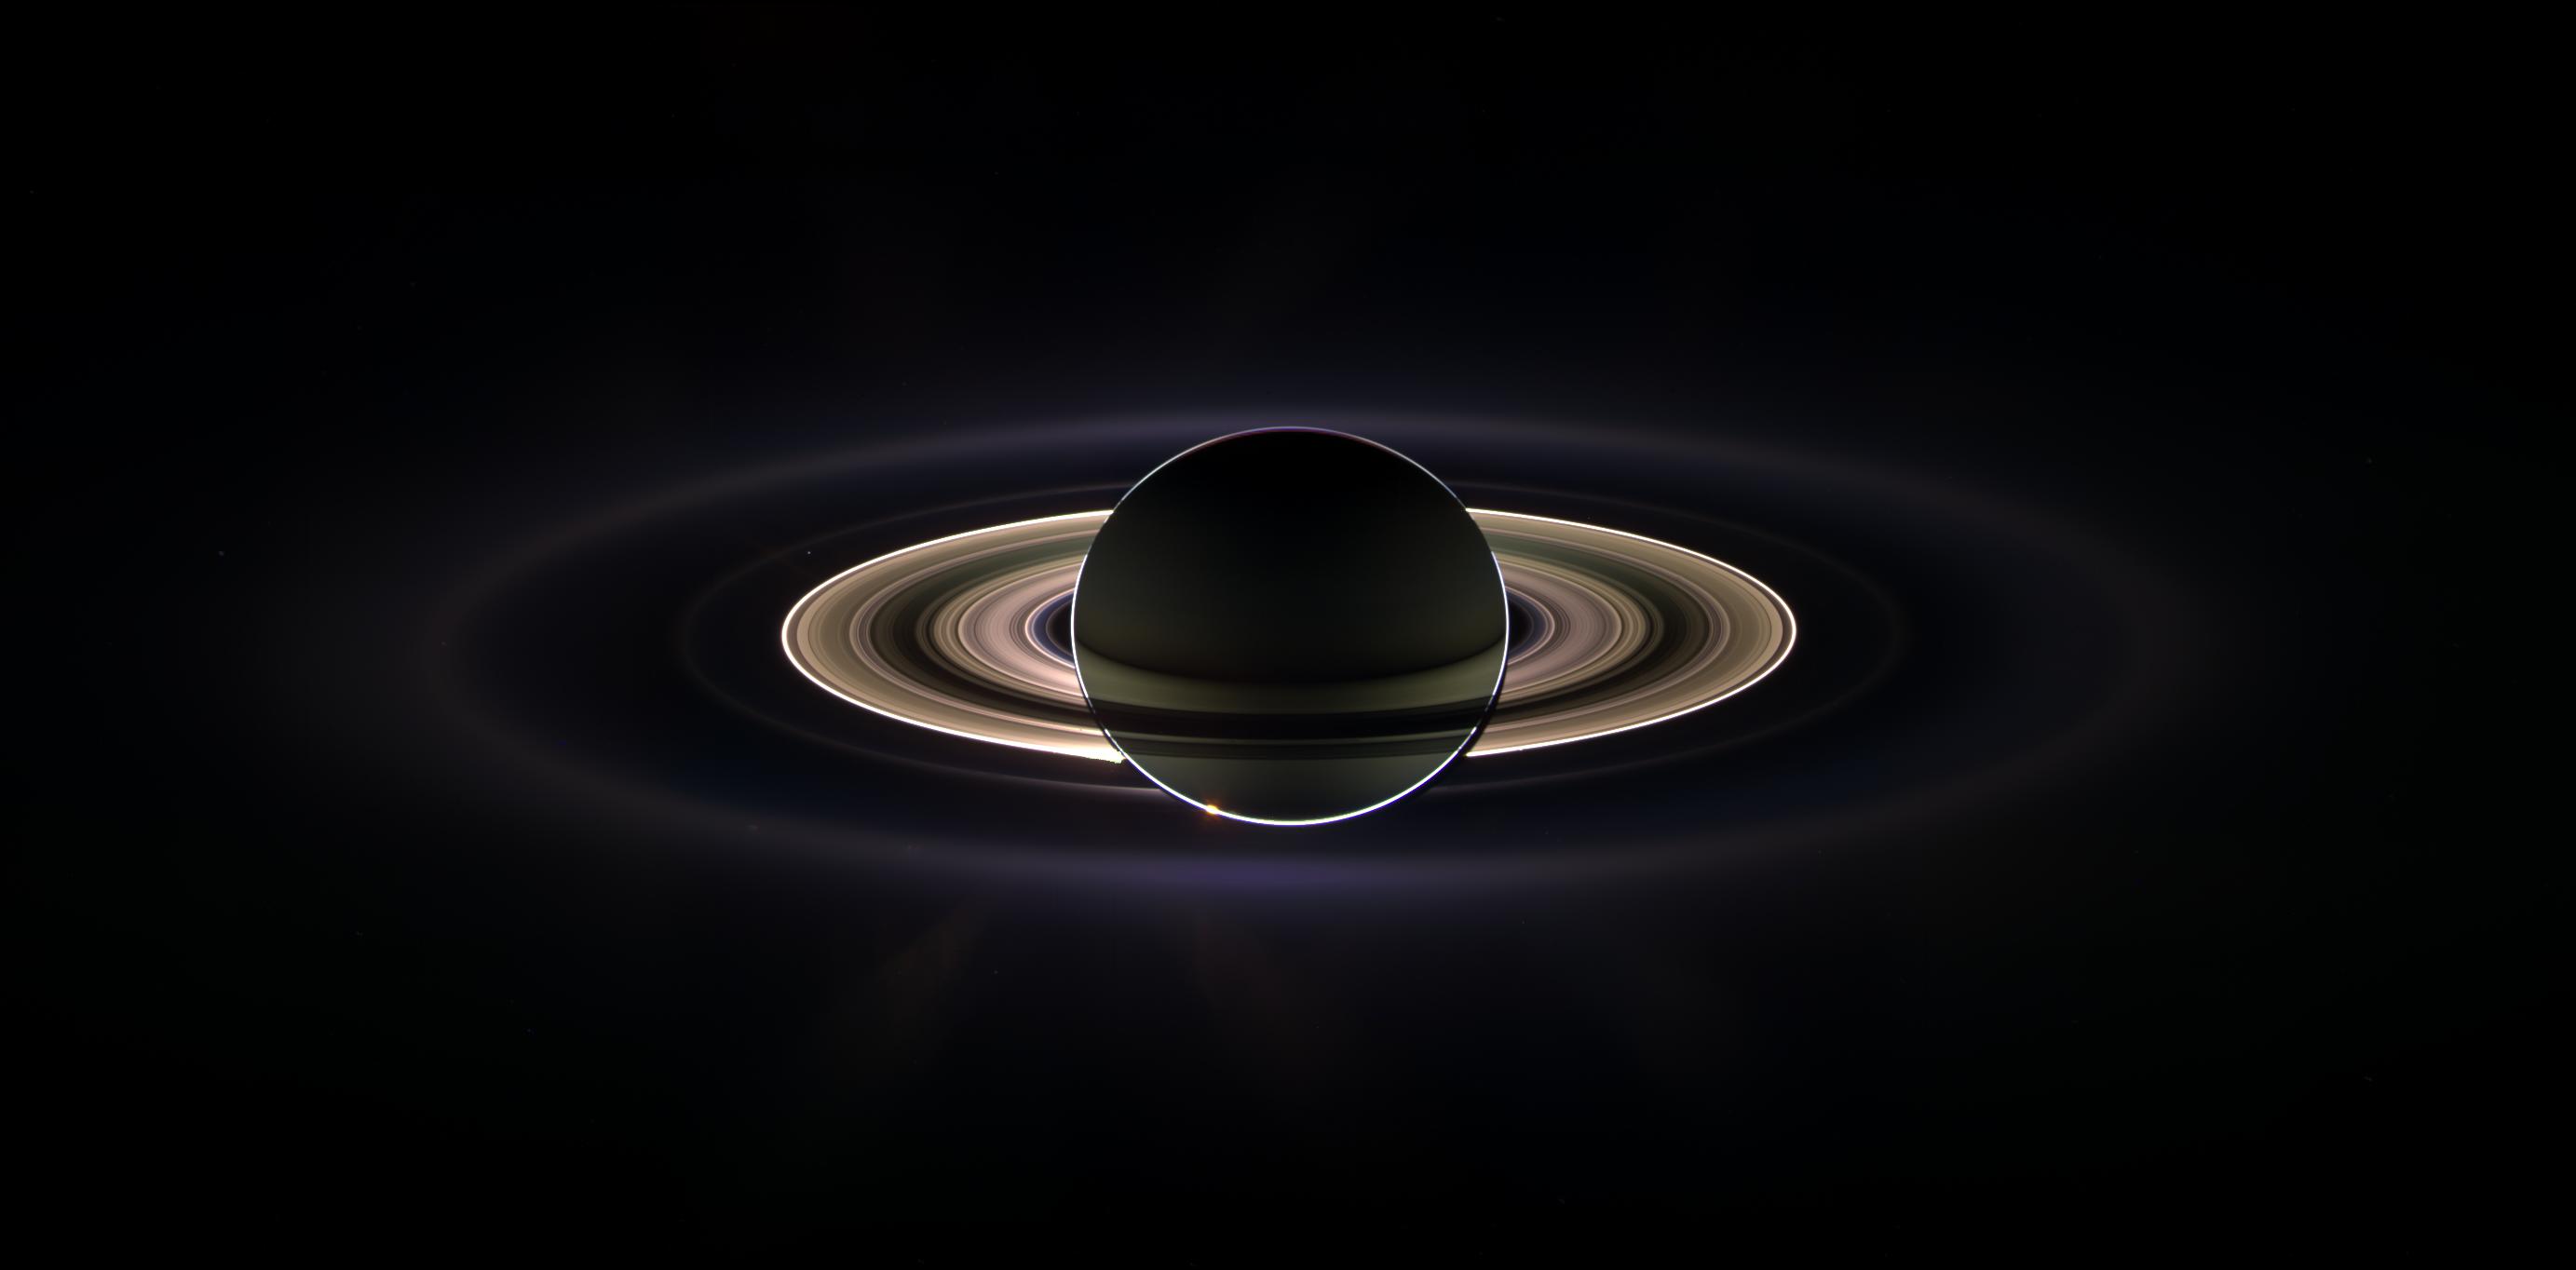 Spectacular Eclipses in the Saturn System – Cassini Legacy: 1997-2017